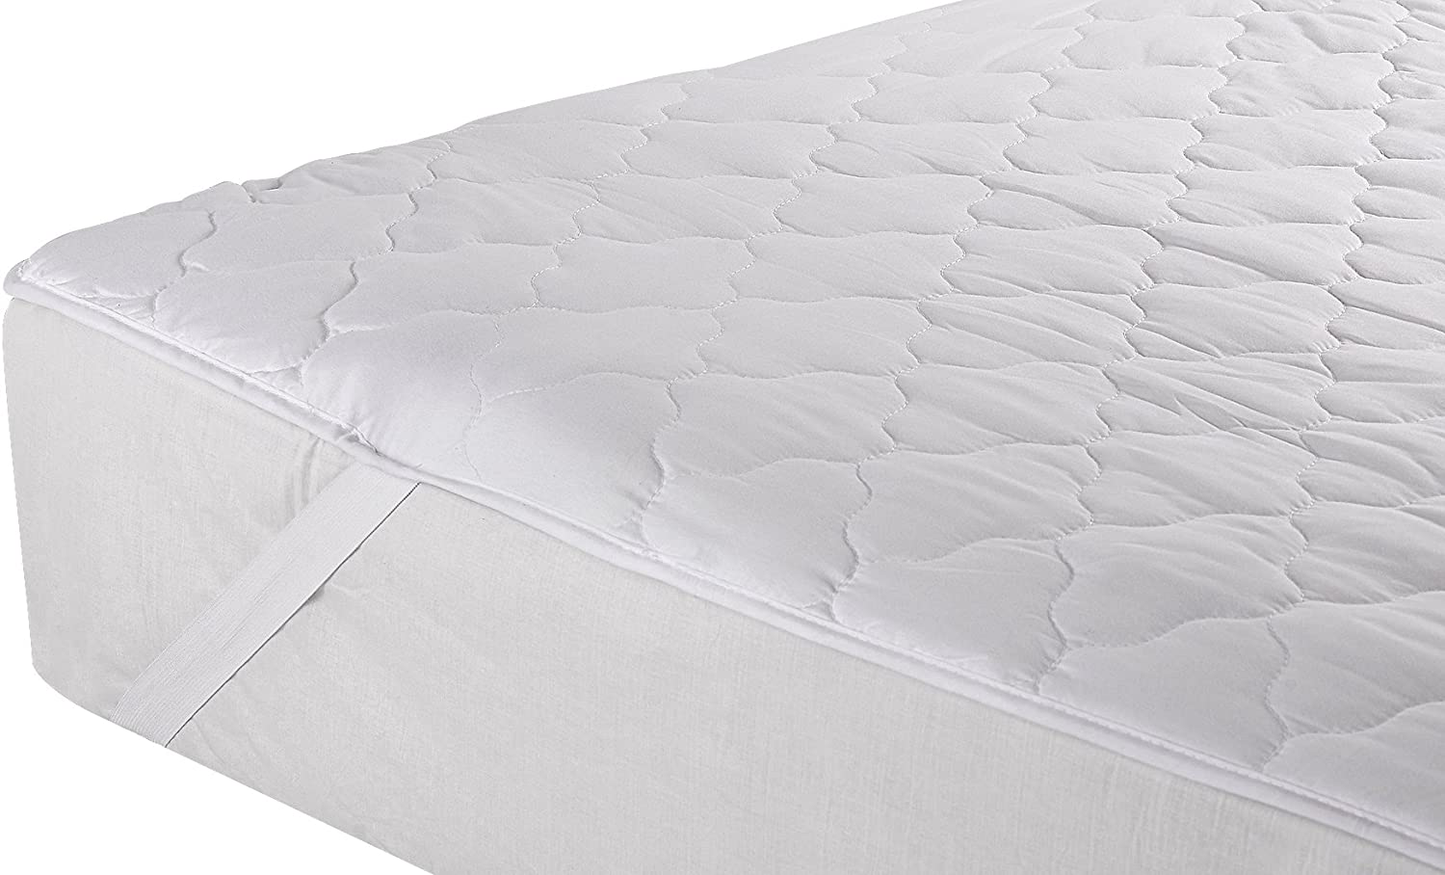 Gilbin, Quilted Cot Size Mattress Pad, 30 x 74